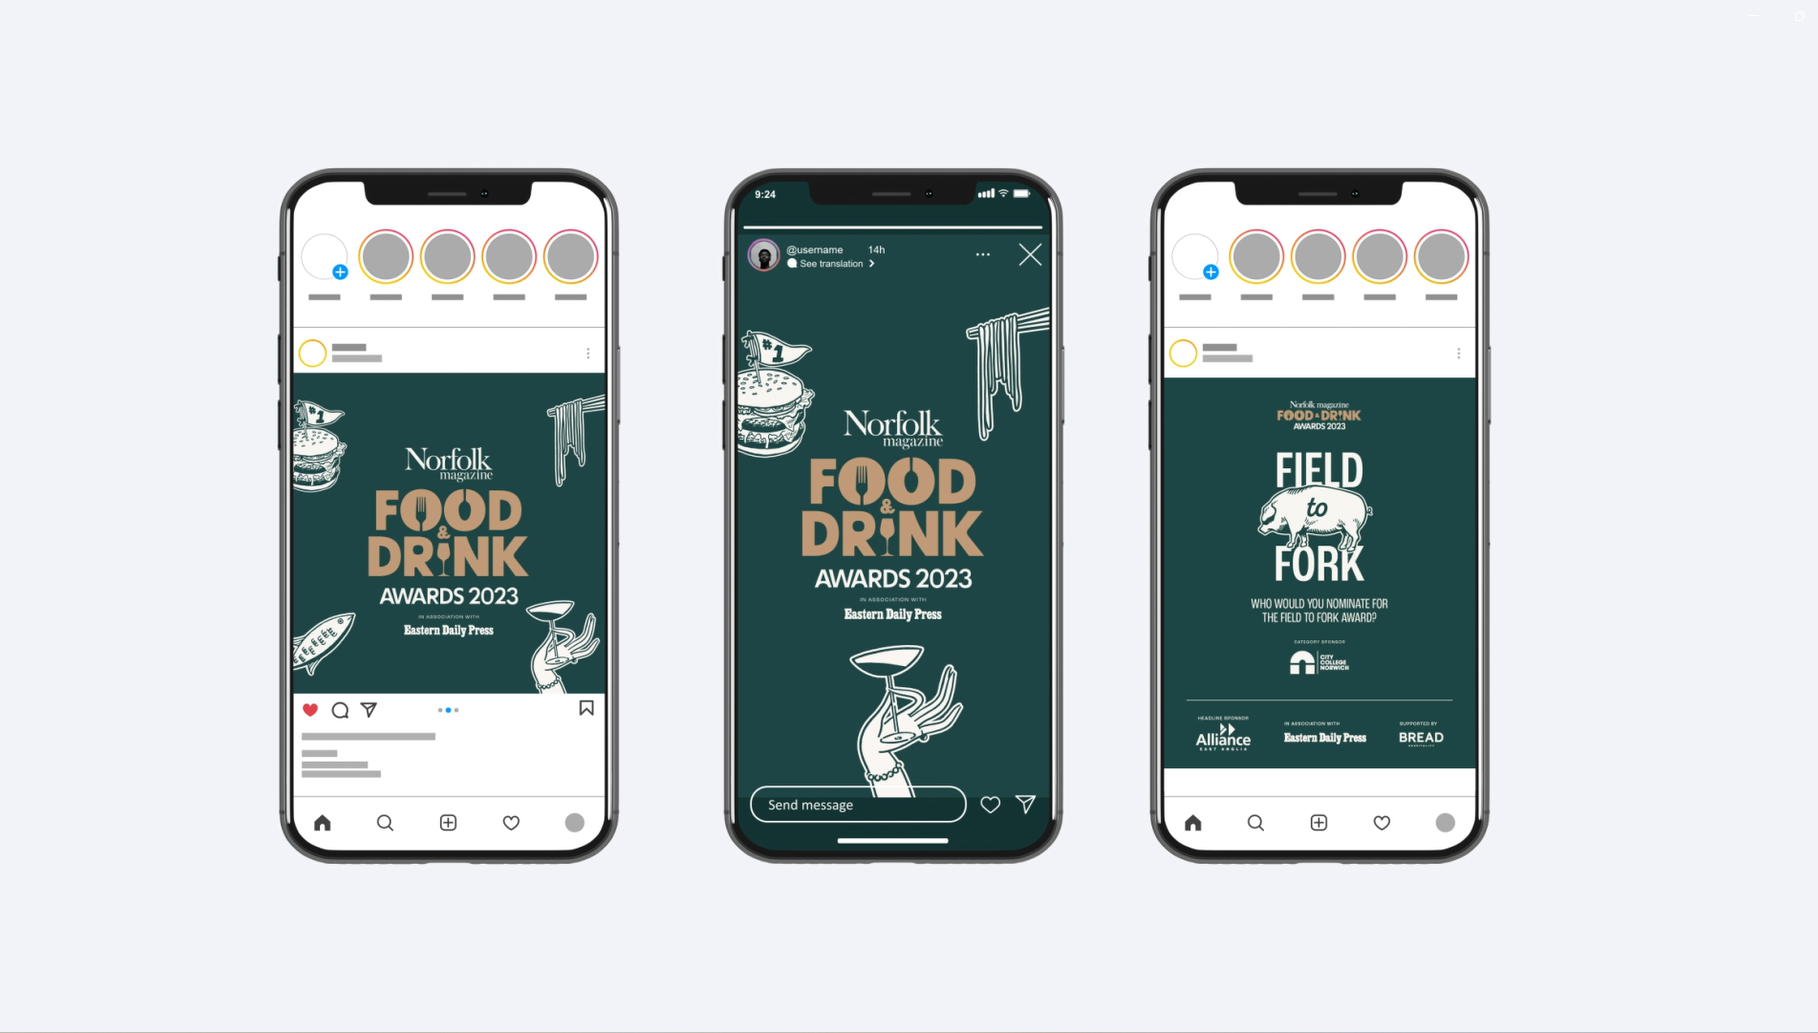 Three phones are displaying different images of food and drink on their screens.